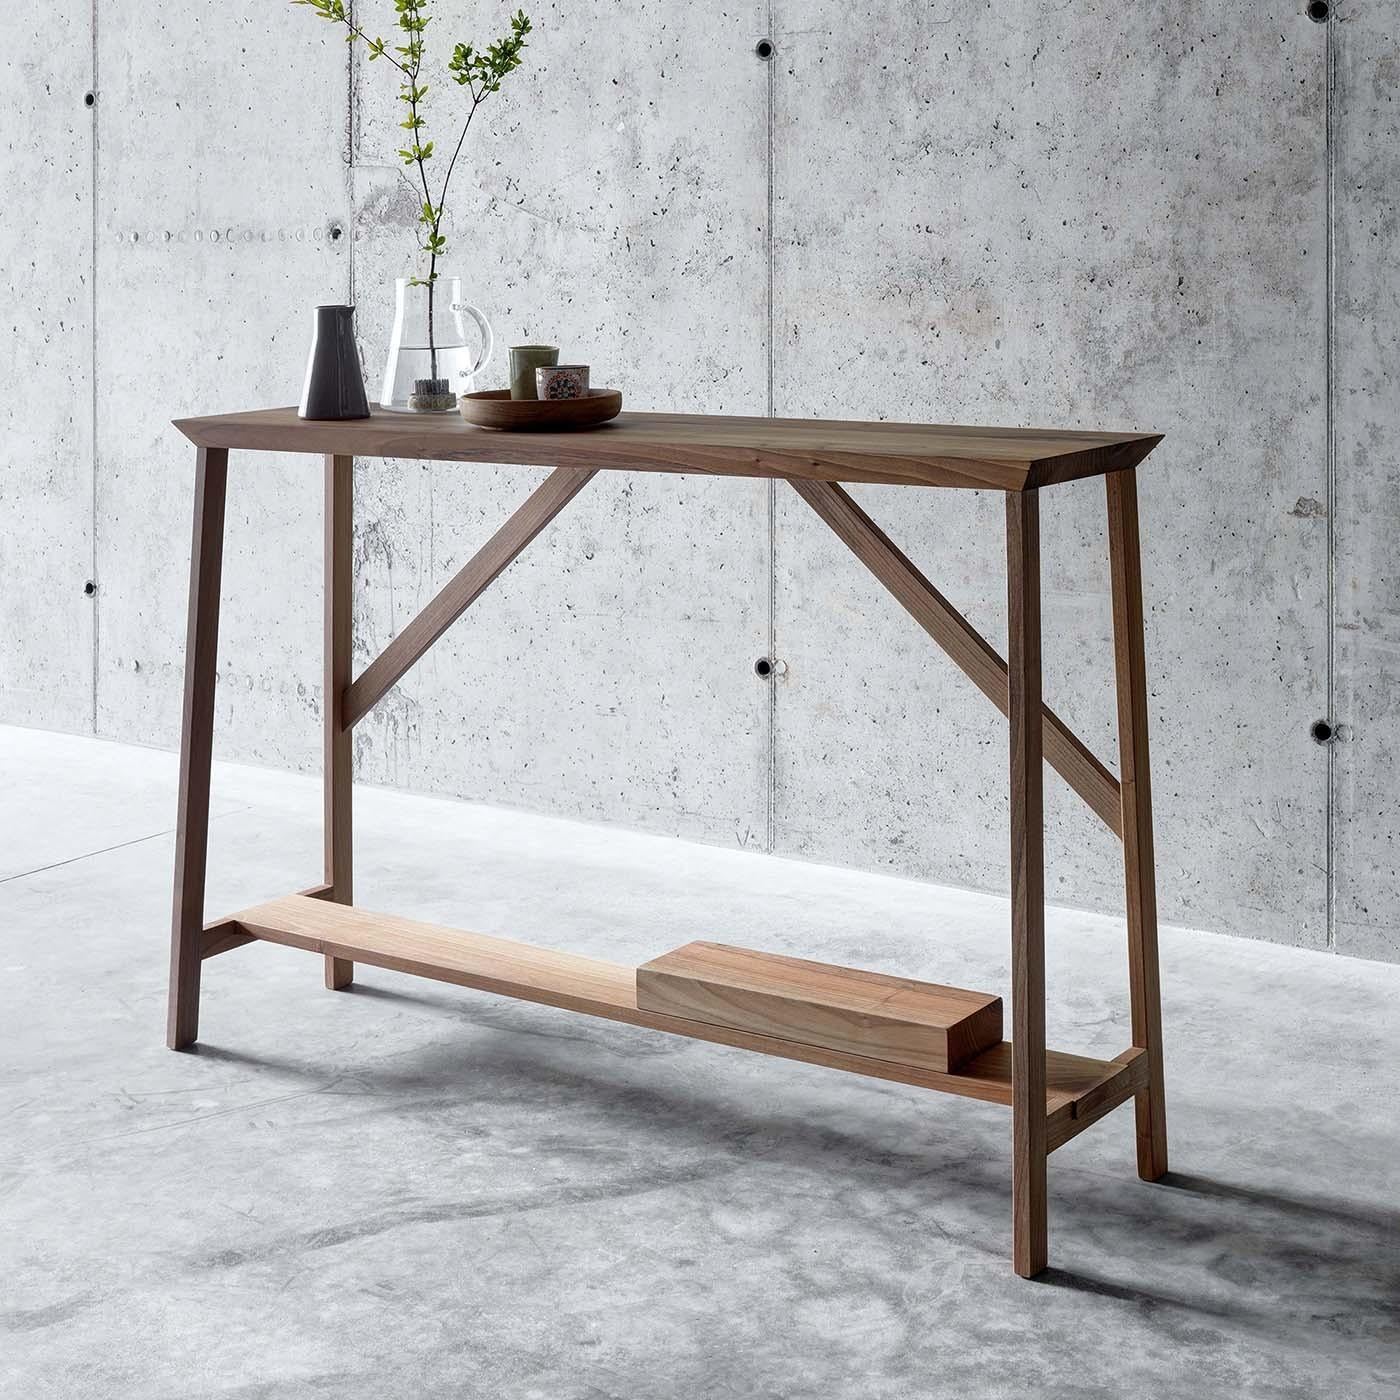 This elegant console is an exercise in balance and lightness. Its linear silhouette was designed by Act_Romegialli and crafted entirely of solid walnut. Its delicate elements, crossing at 90 and 45-degree angles, make up a modern interpretation of